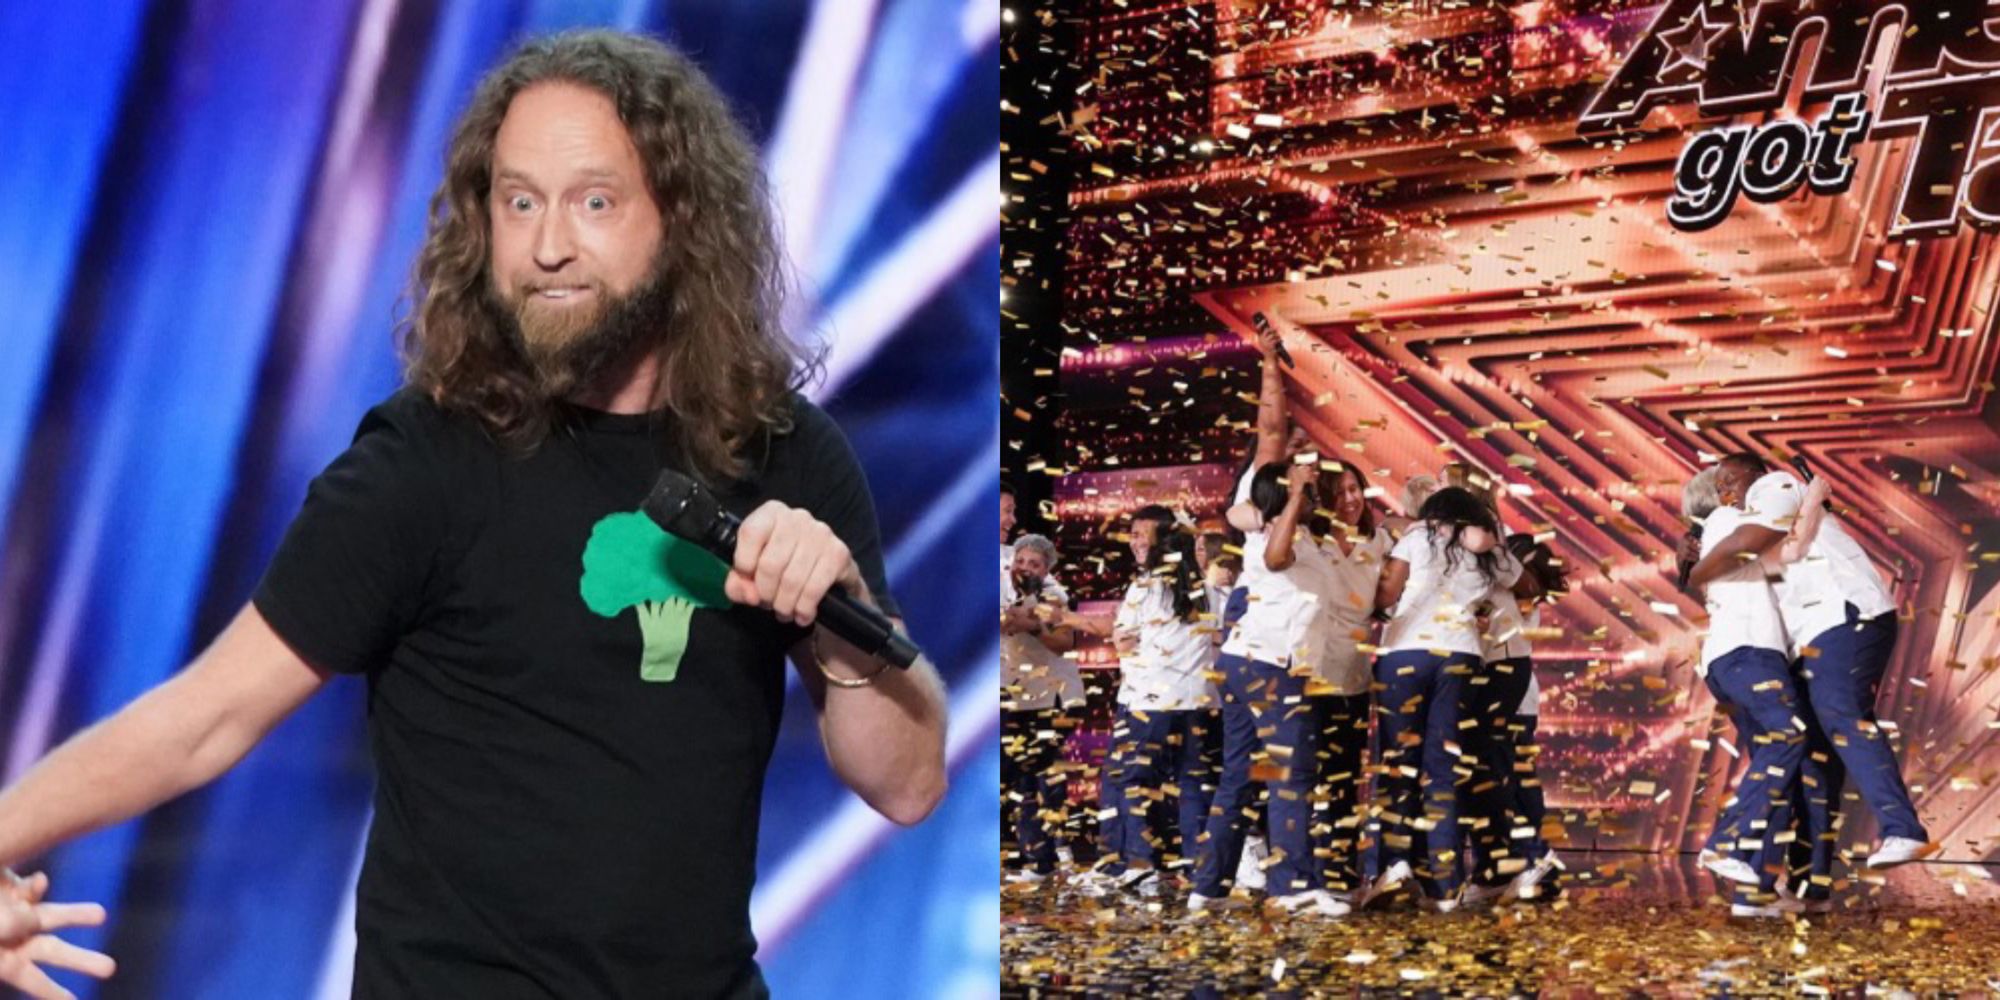 America’s Got Talent Season 16: Where Are They Now?